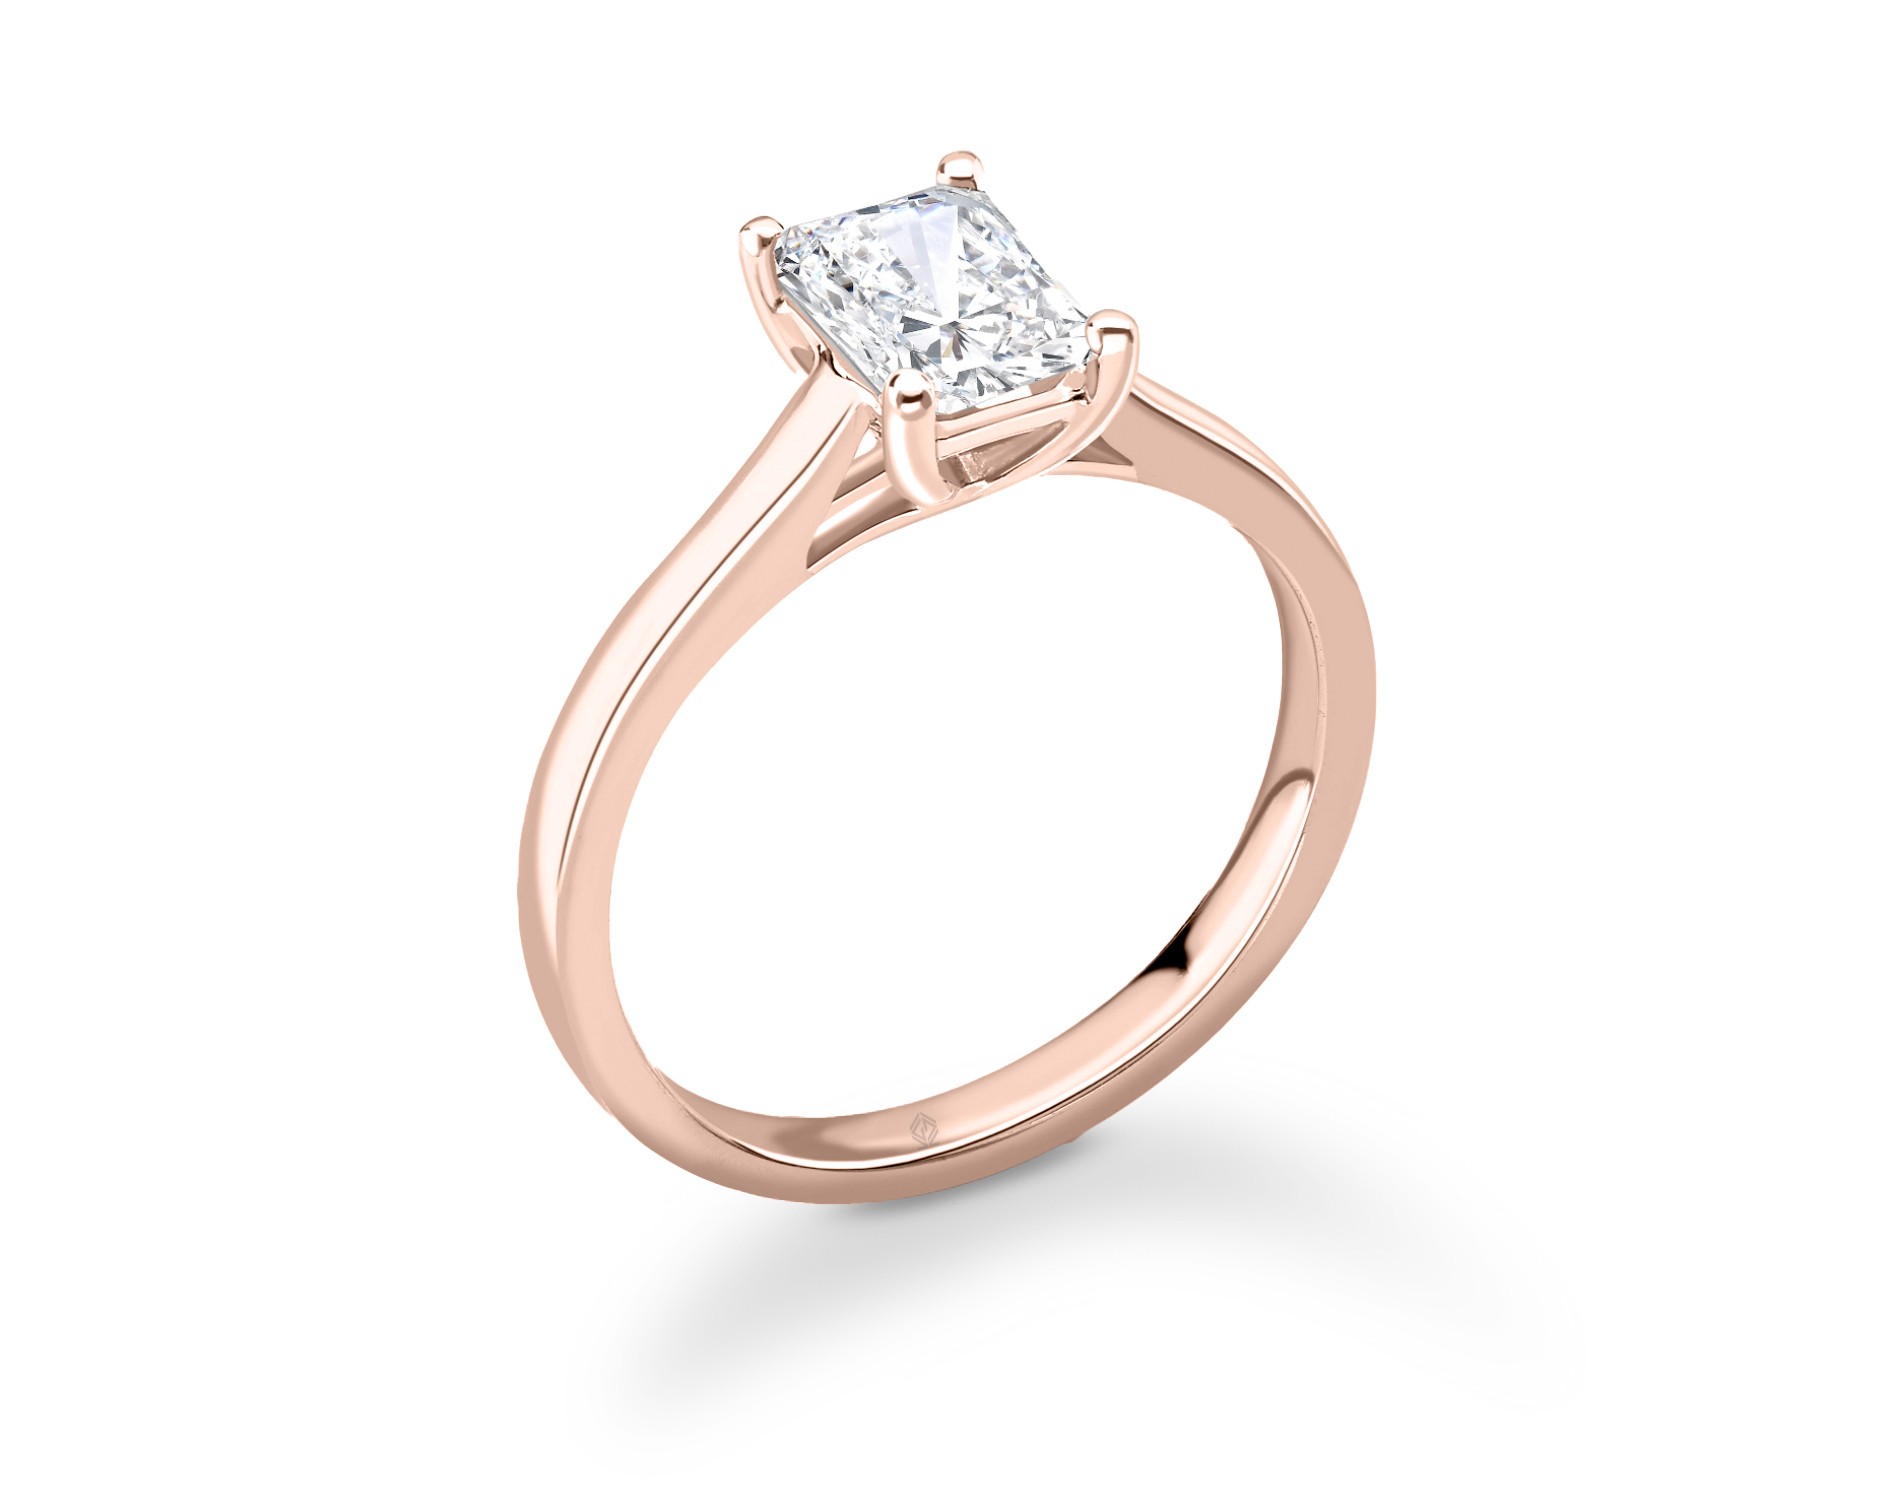 18K ROSE GOLD EMERALD CUT SOLITAIRE DIAMOND ENGAGEMENT RING